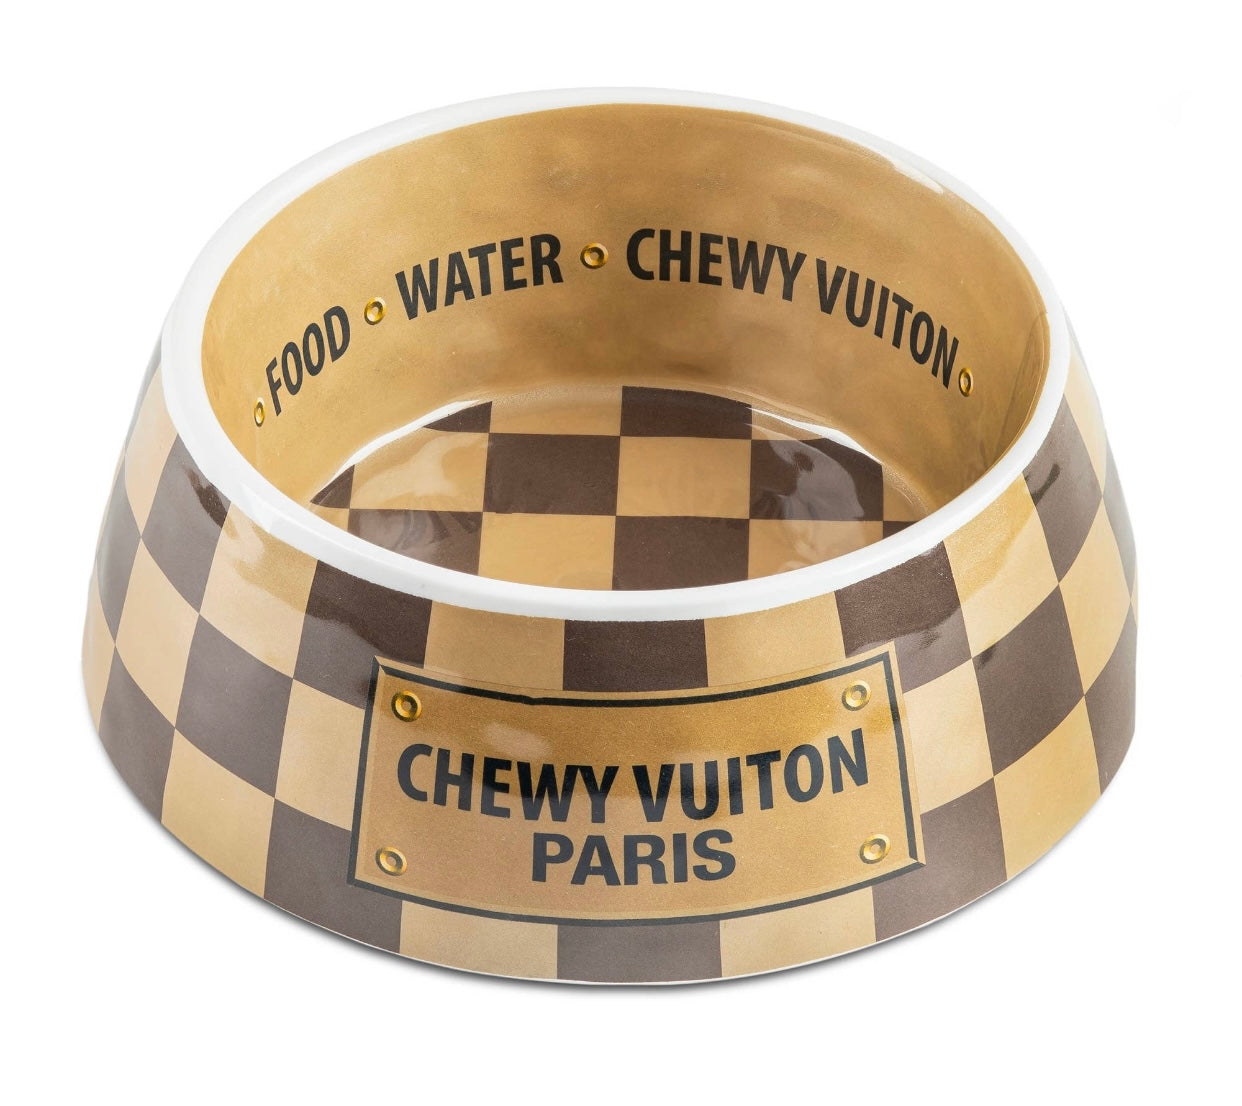 Small Chewy Vuiton dog bowl